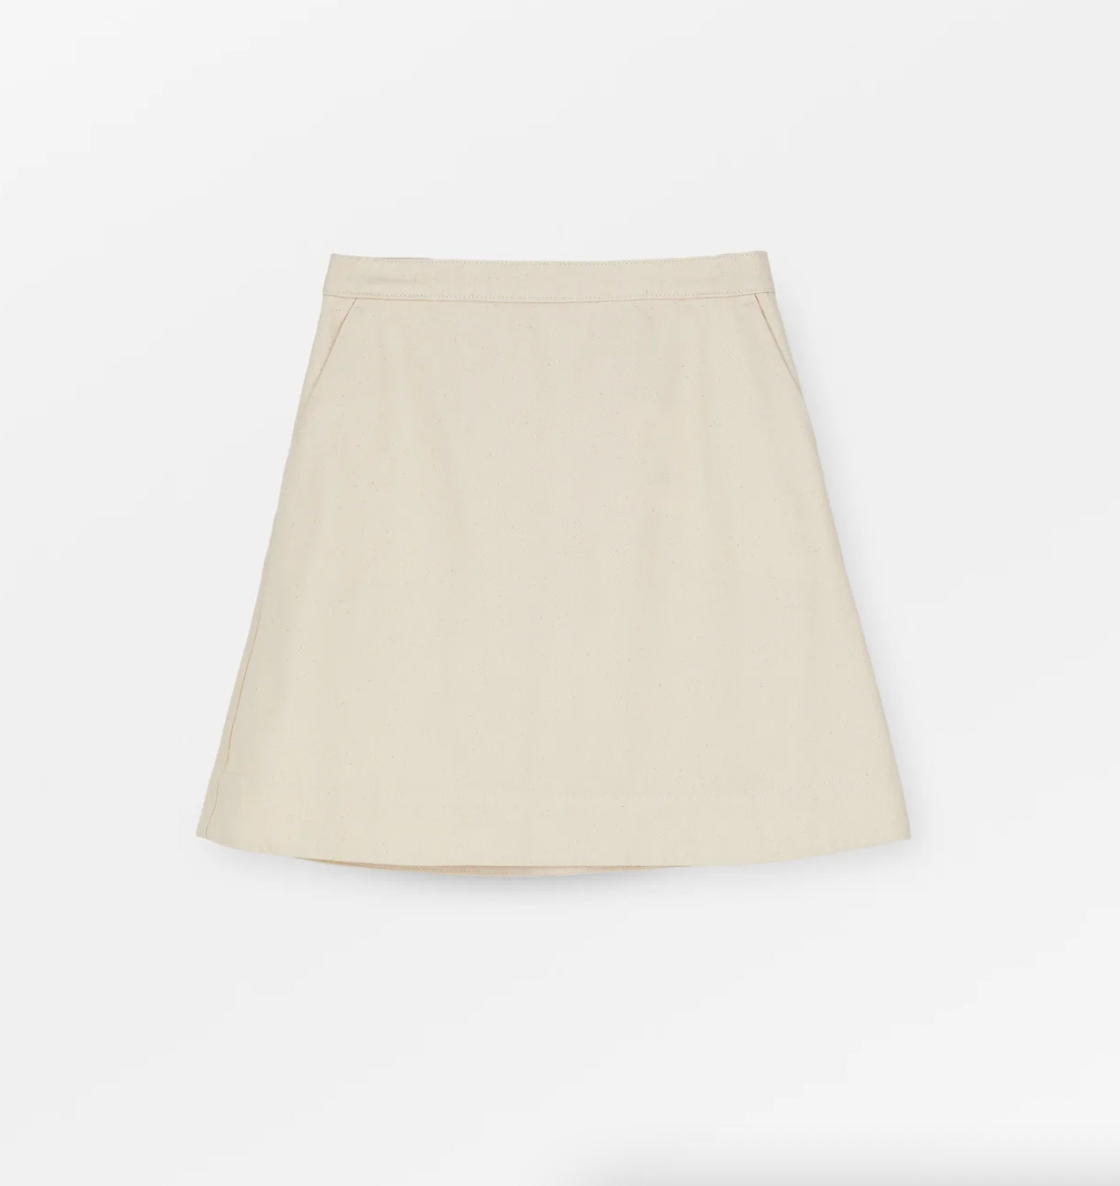 Product Image for Jude Skirt, Ecru